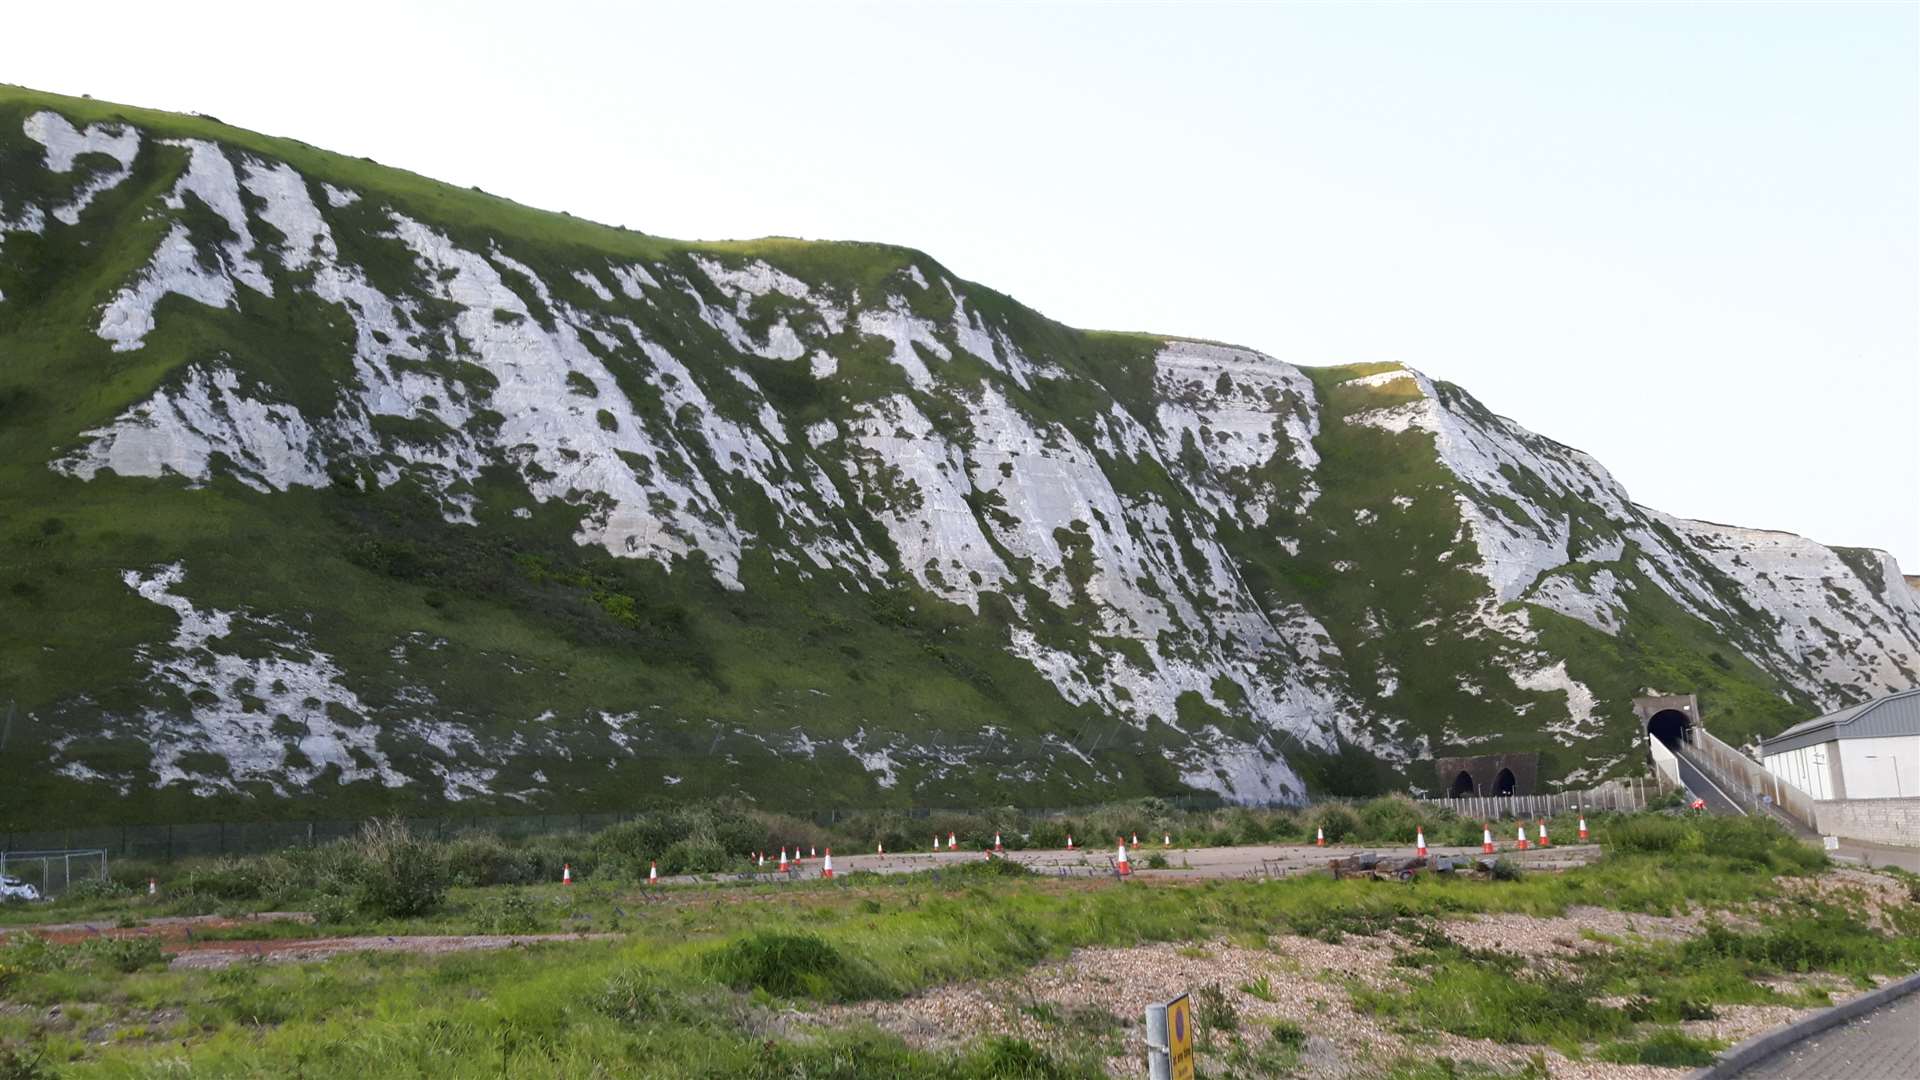 A previous chalkfall happened near Samphire Hoe a couple of weeks before